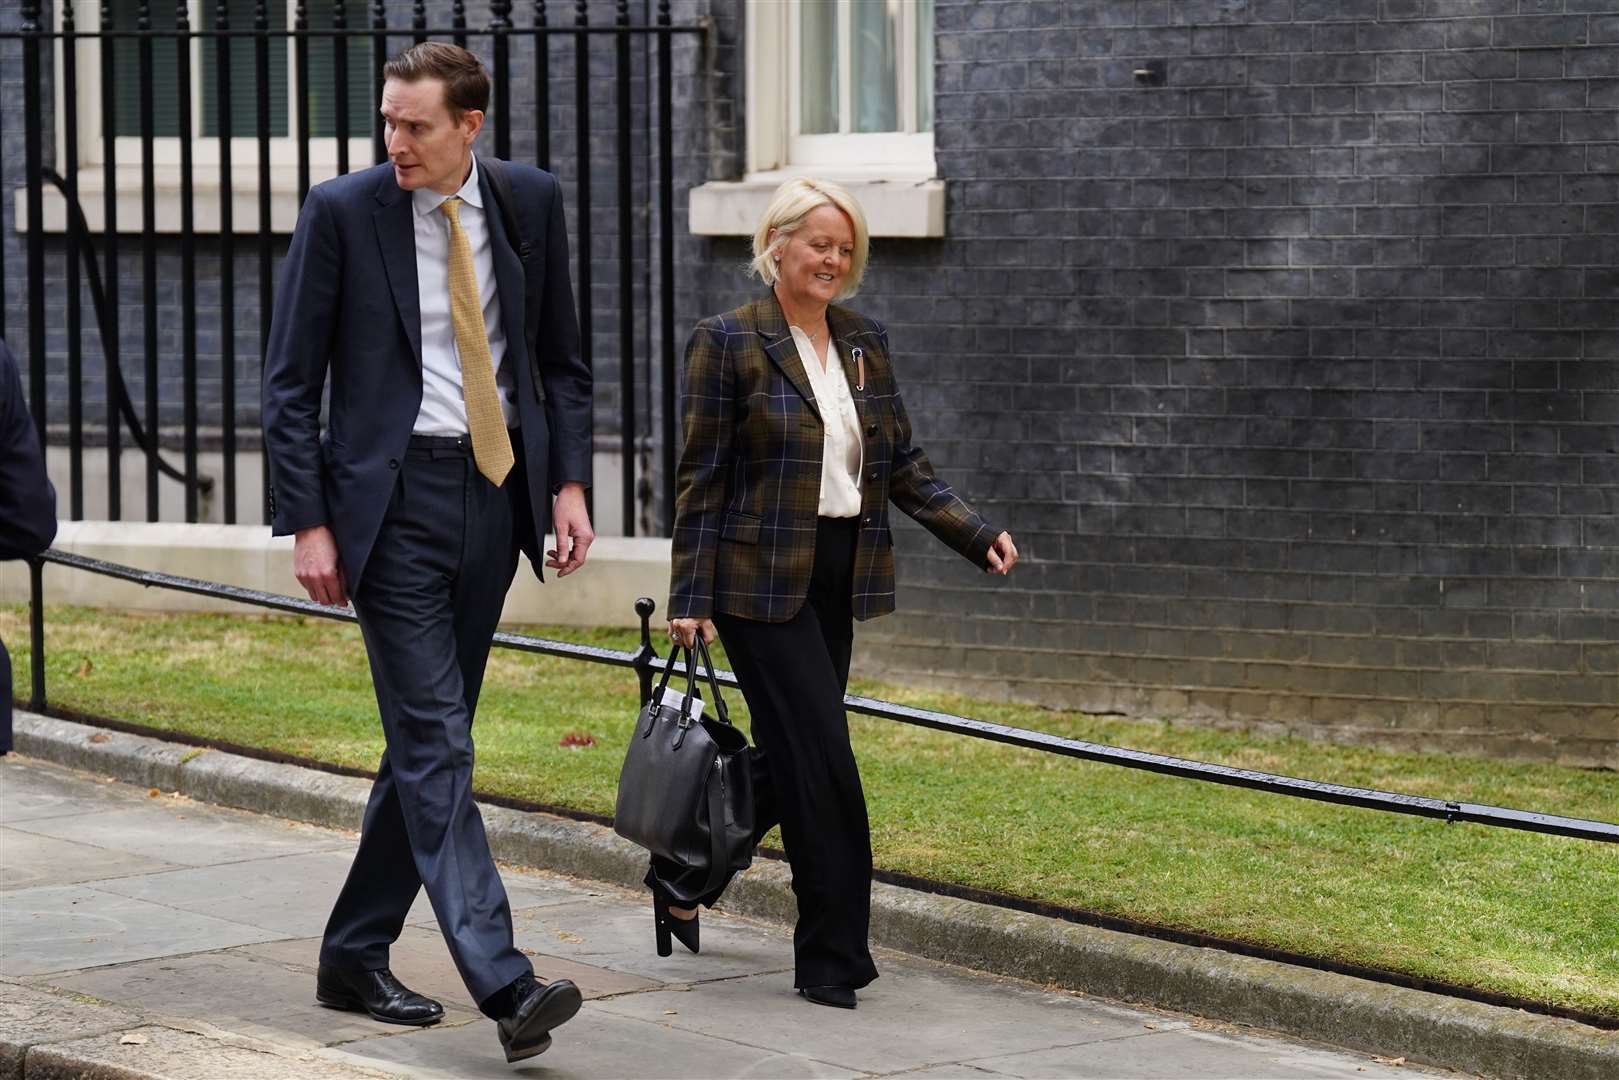 Alison Rose, NatWest chief executive, departs Downing Street after meeting with Chancellor Jeremy Hunt (James Manning/PA)